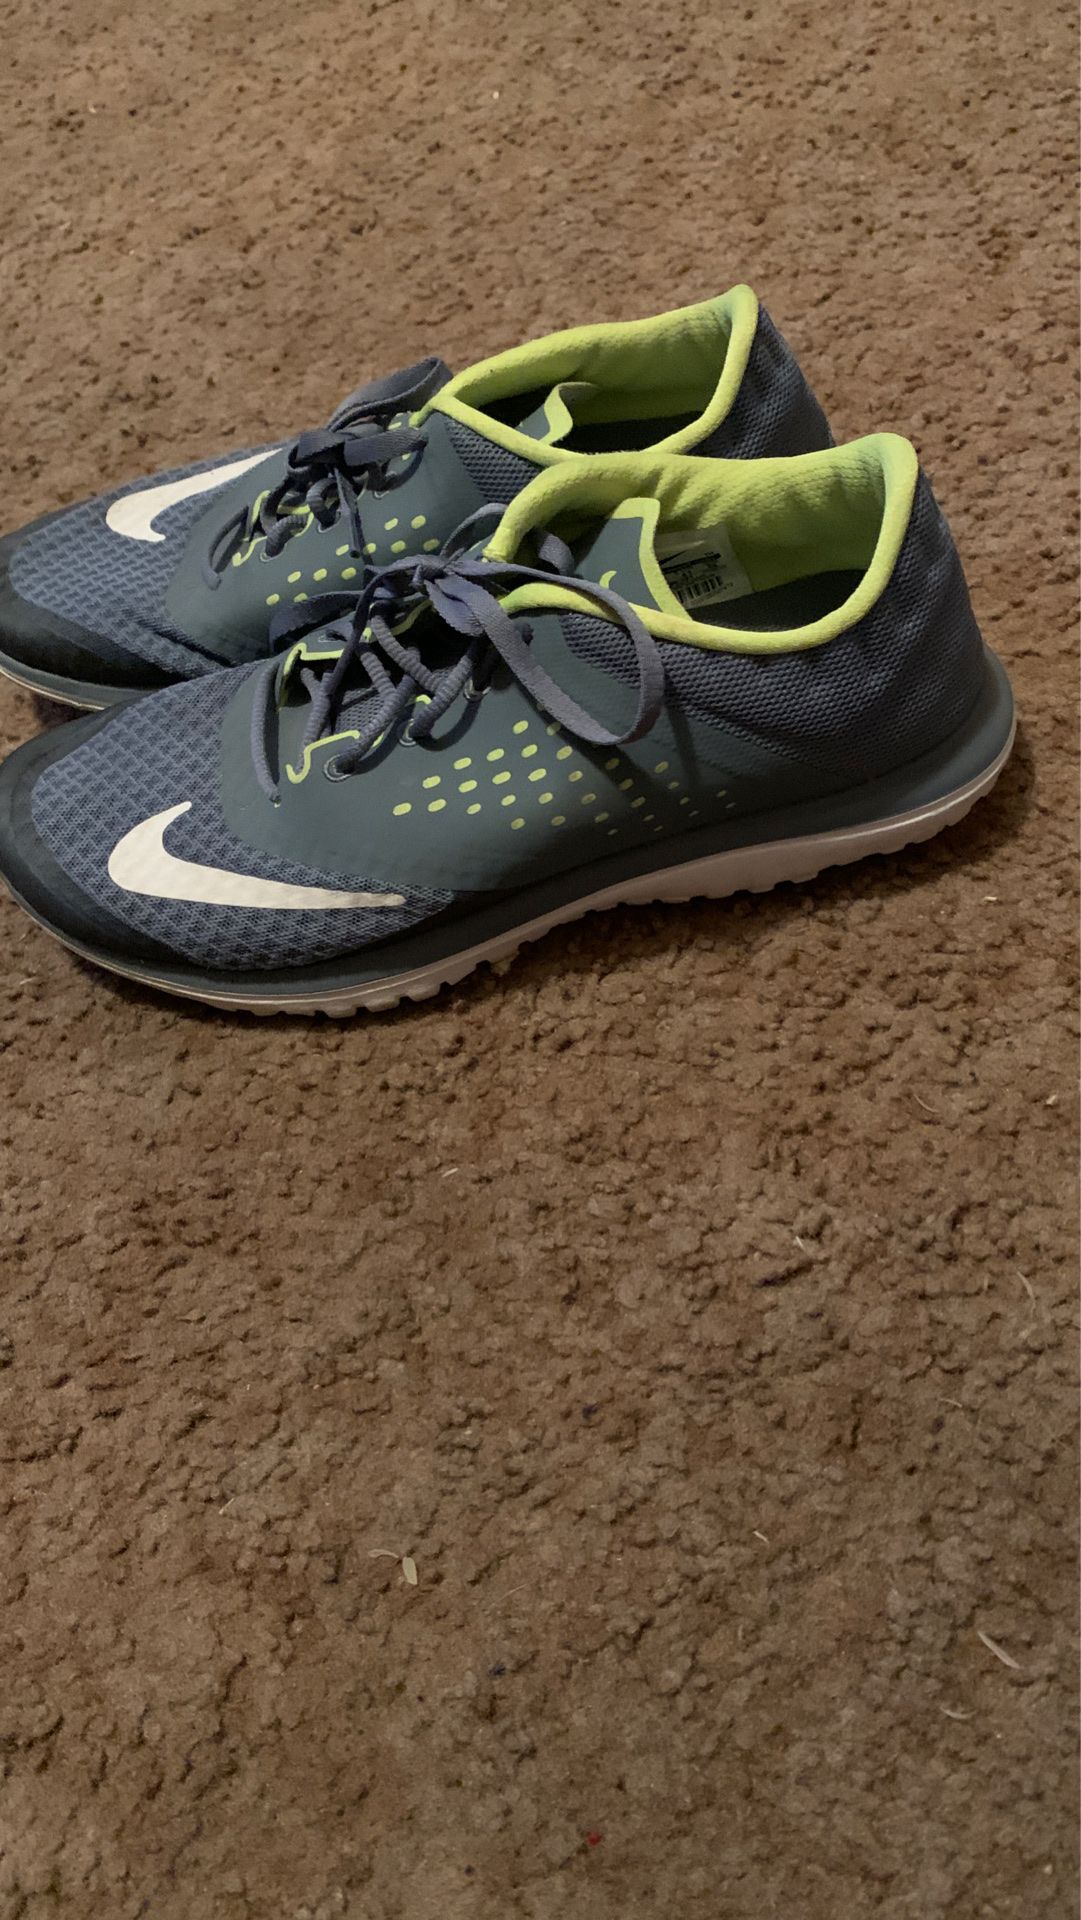 Nike Running Shoes, size 8. Need gone ASAP